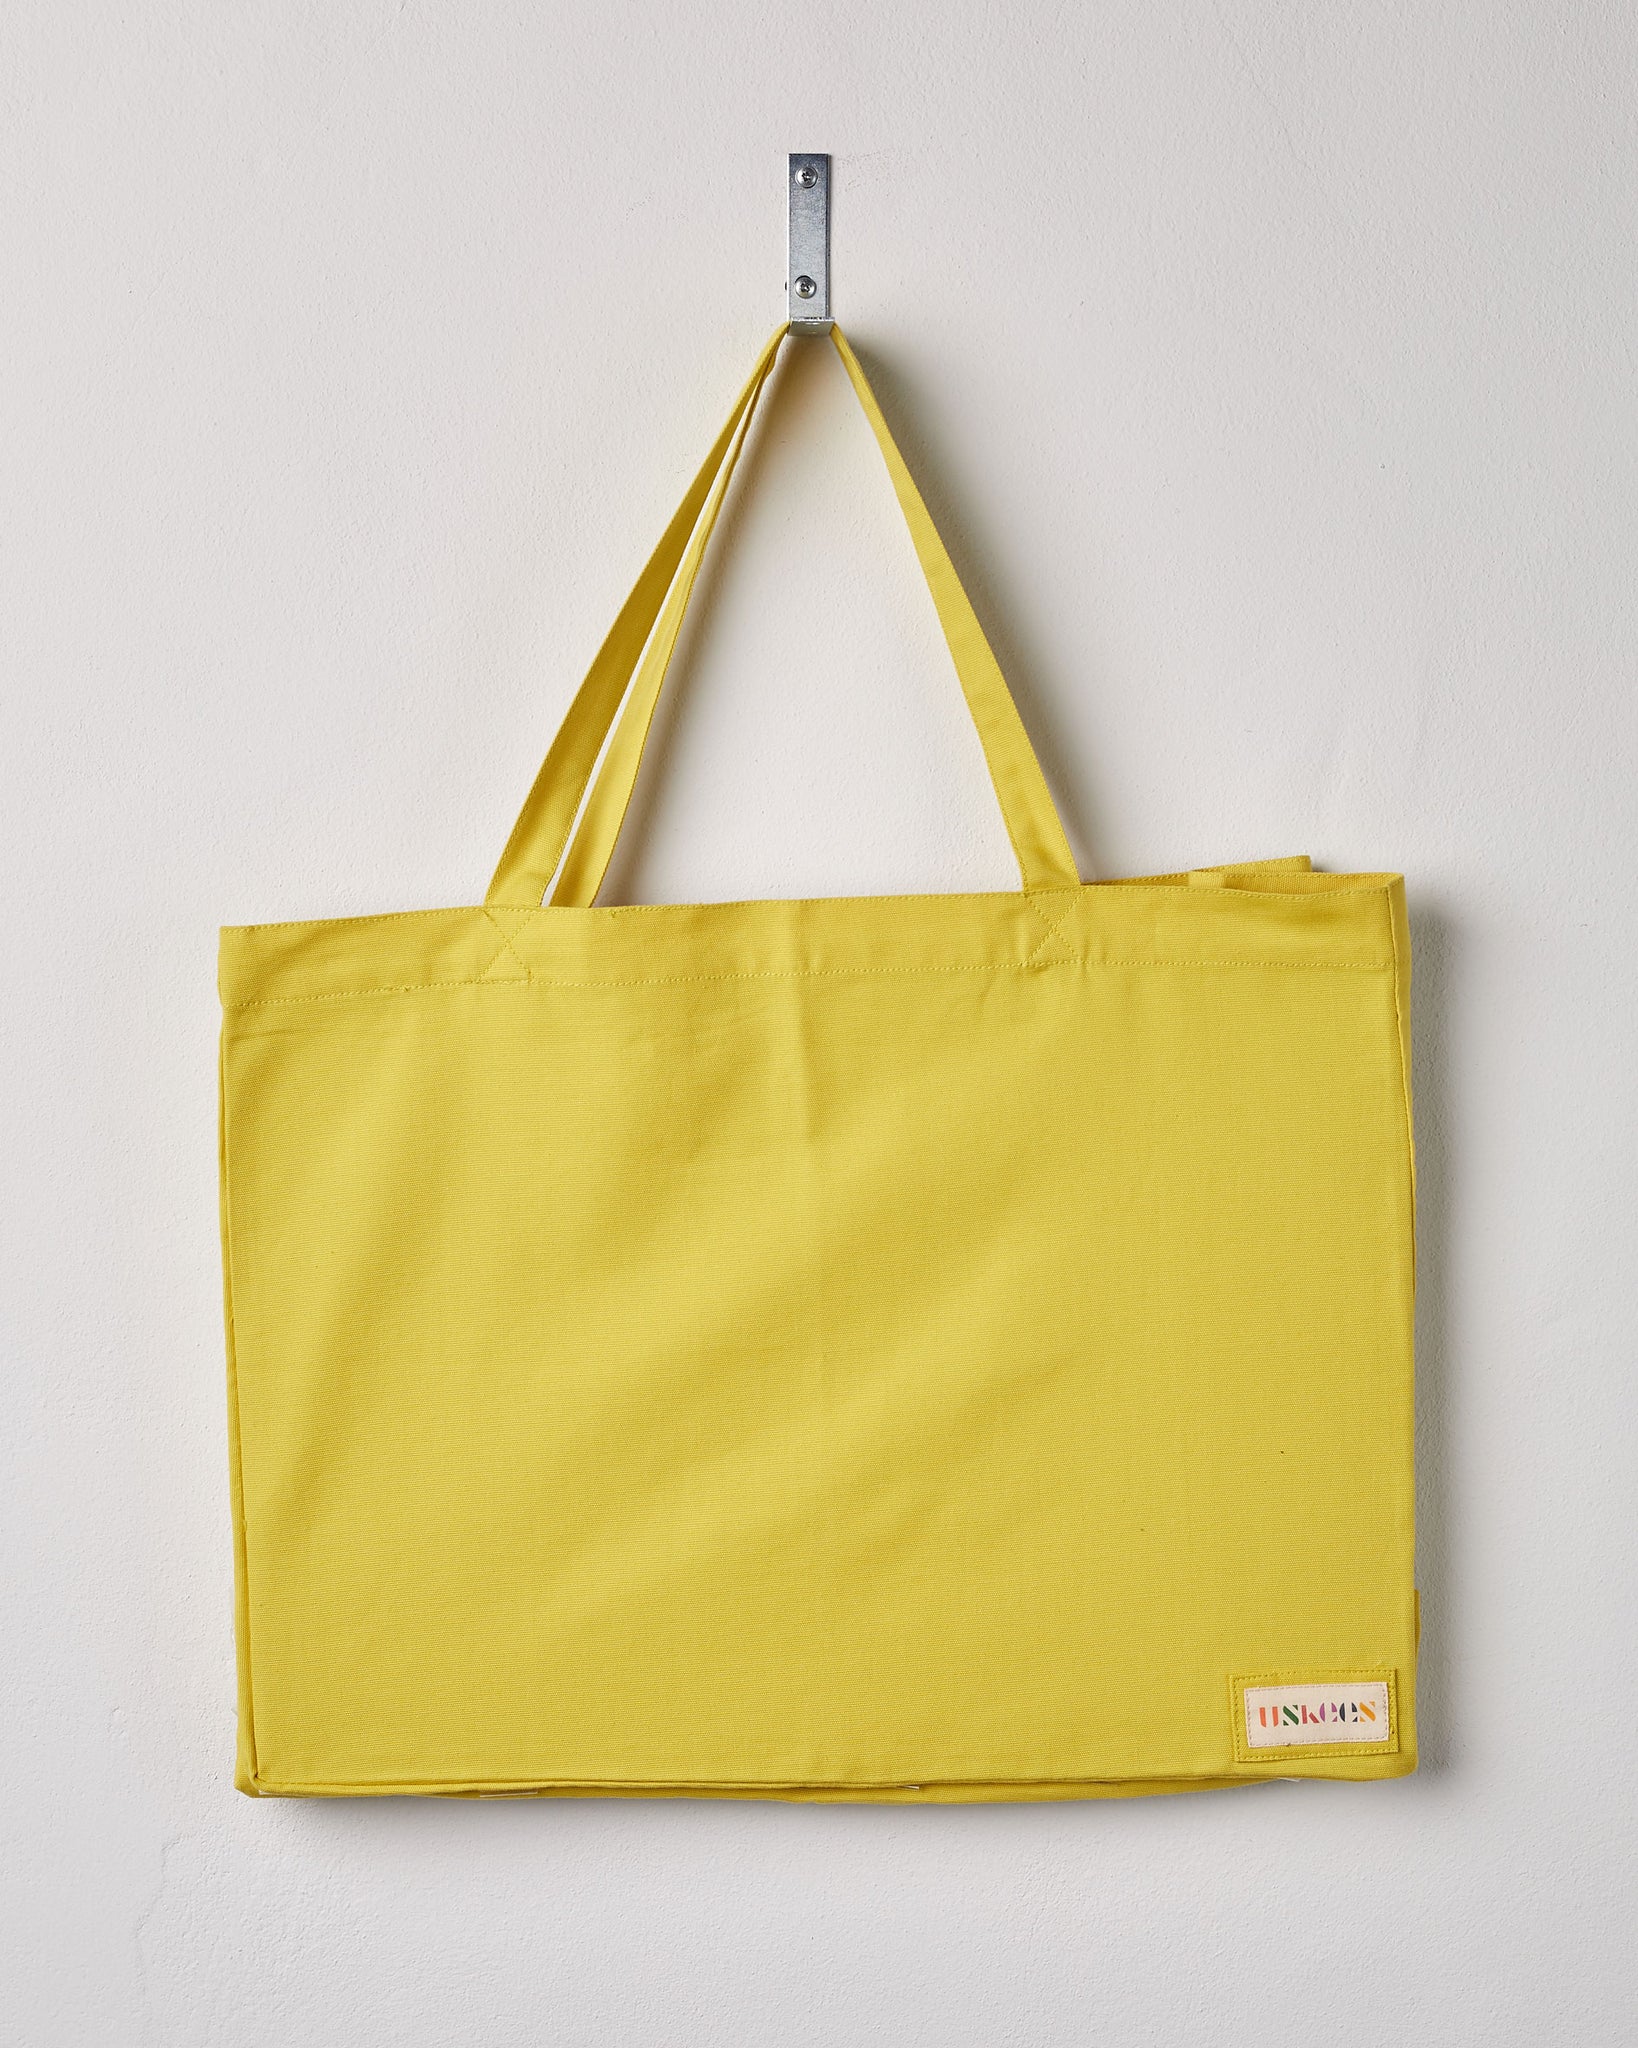 Full, flat view of Uskees #4001, large grapefruit-yellow tote bag, showing twin handles and Uskees woven logo. 